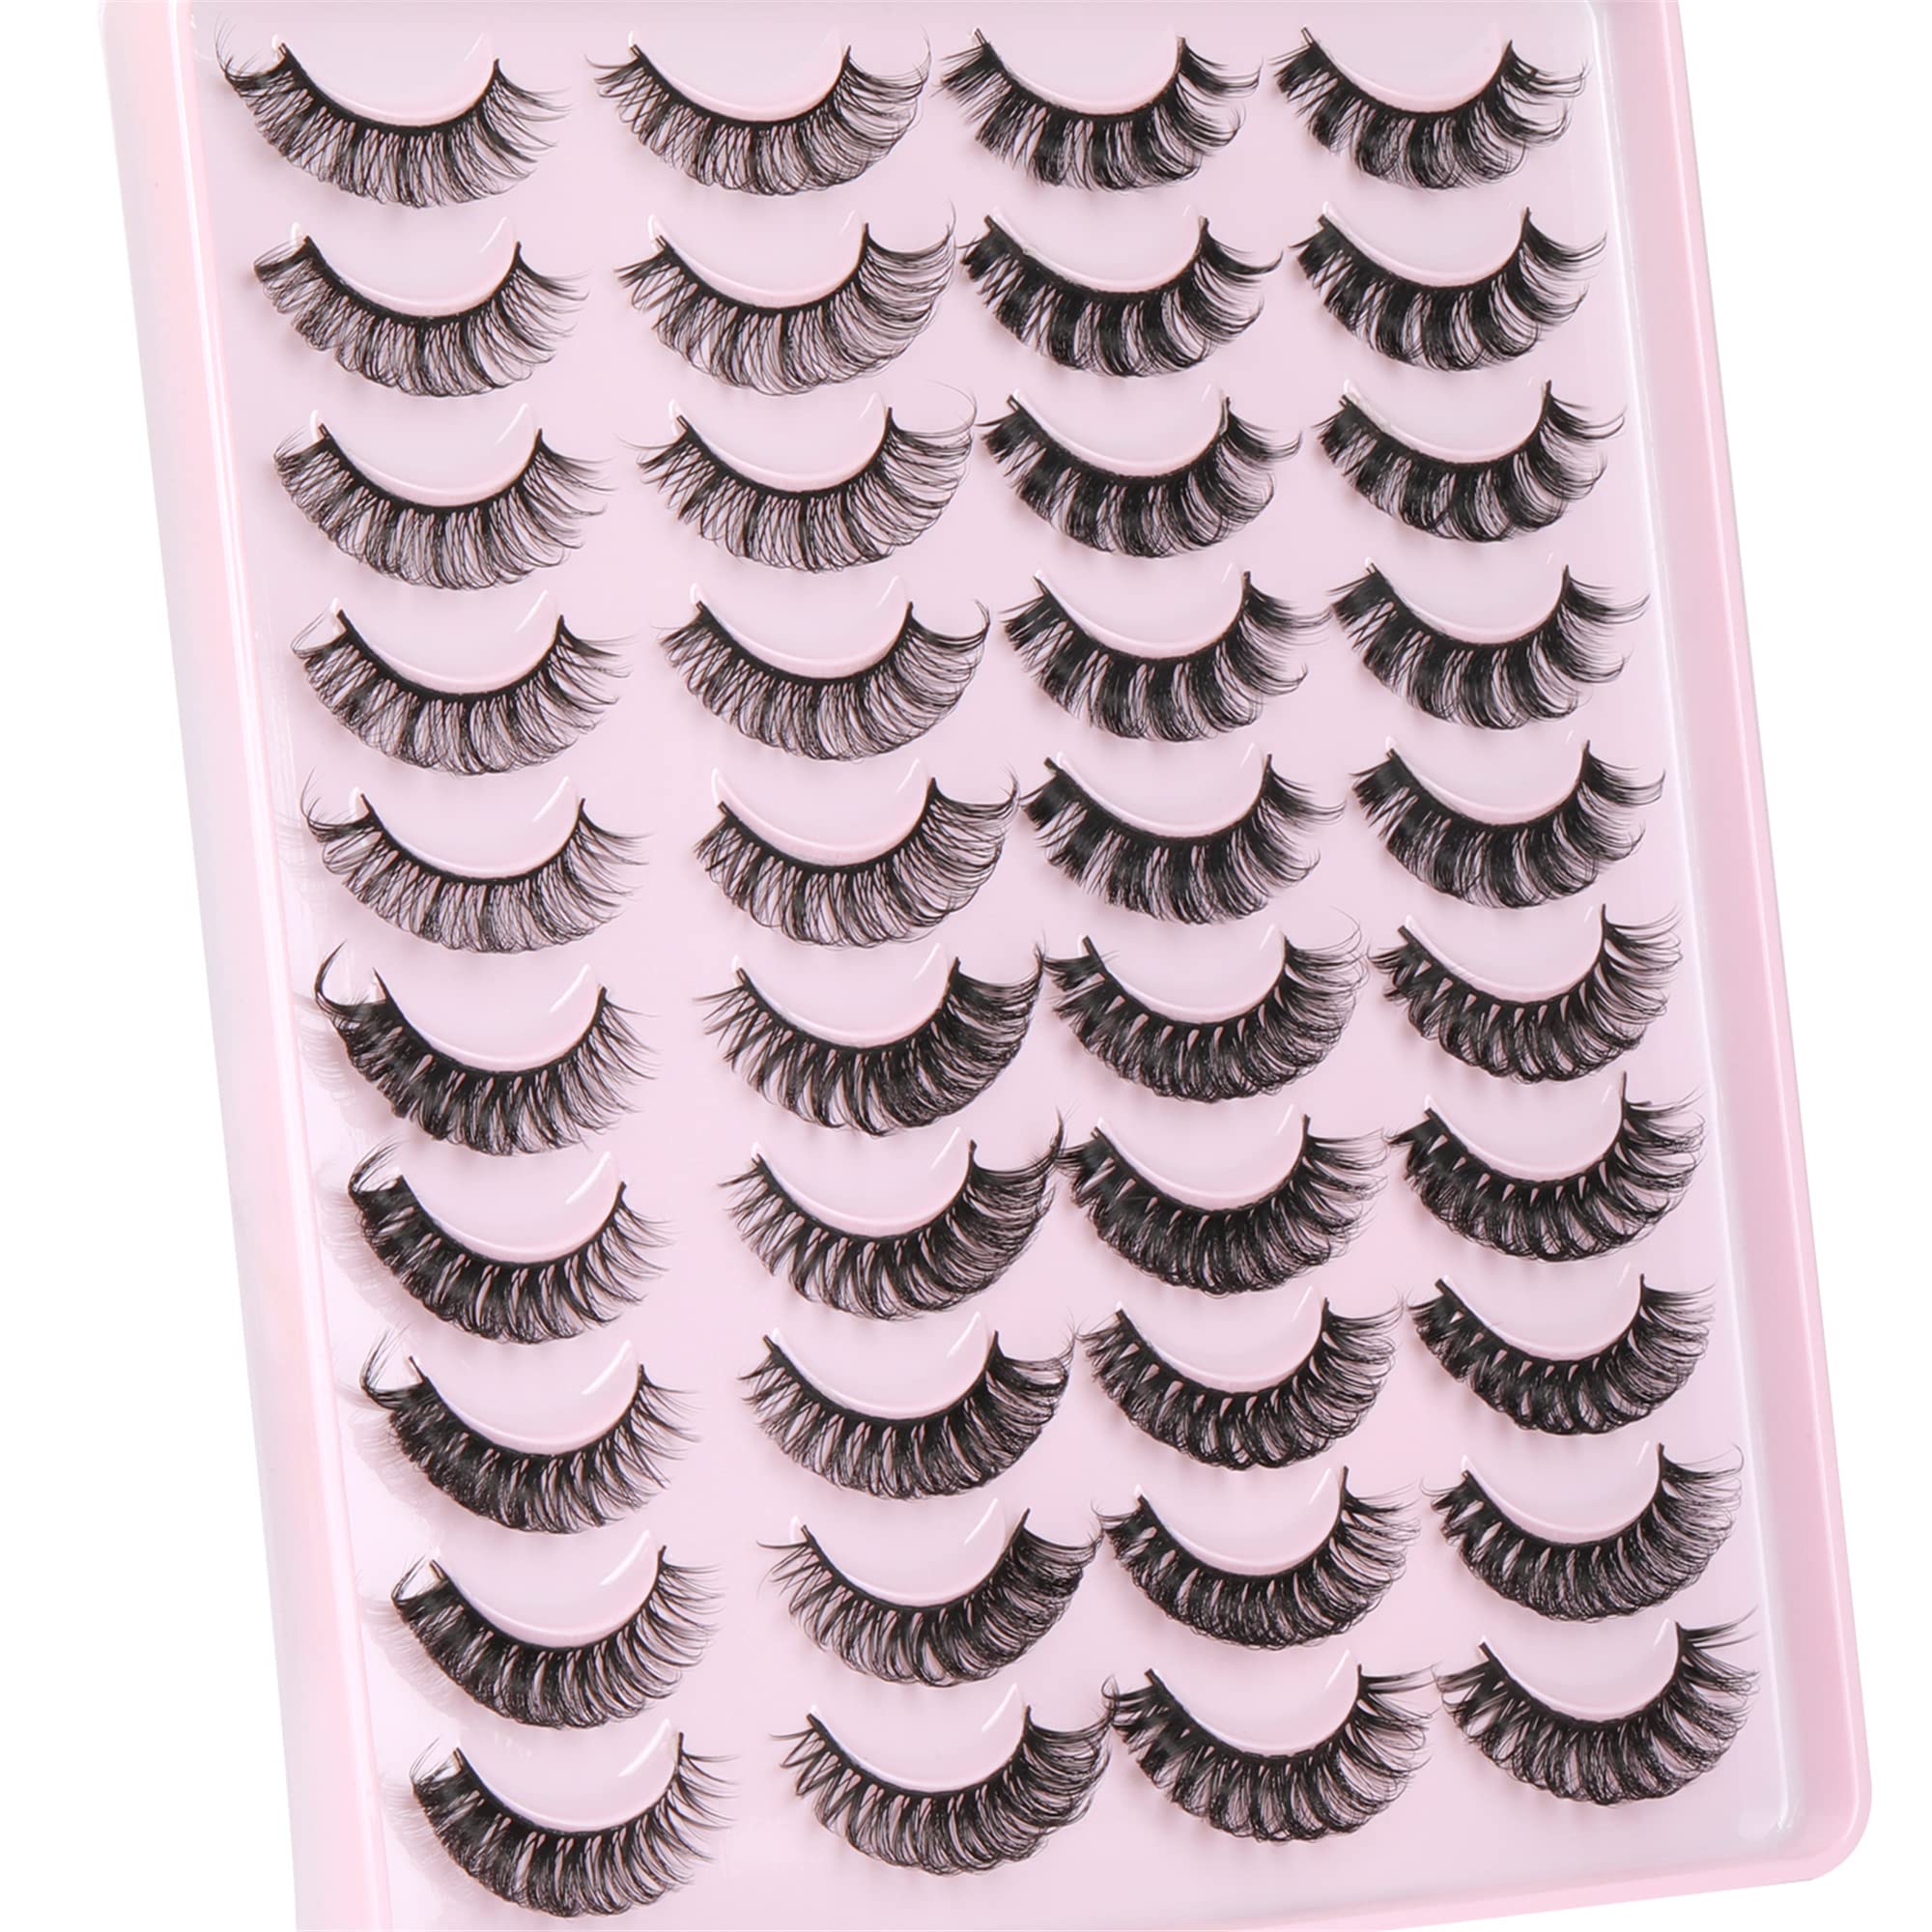 Ruairie False Eyelashes Russian Strip Lashes D Curl Fluffy Wispy Faux Mink Lashes 20 Pairs 4 Styles Volume Curly Fake Eyelashes Pack